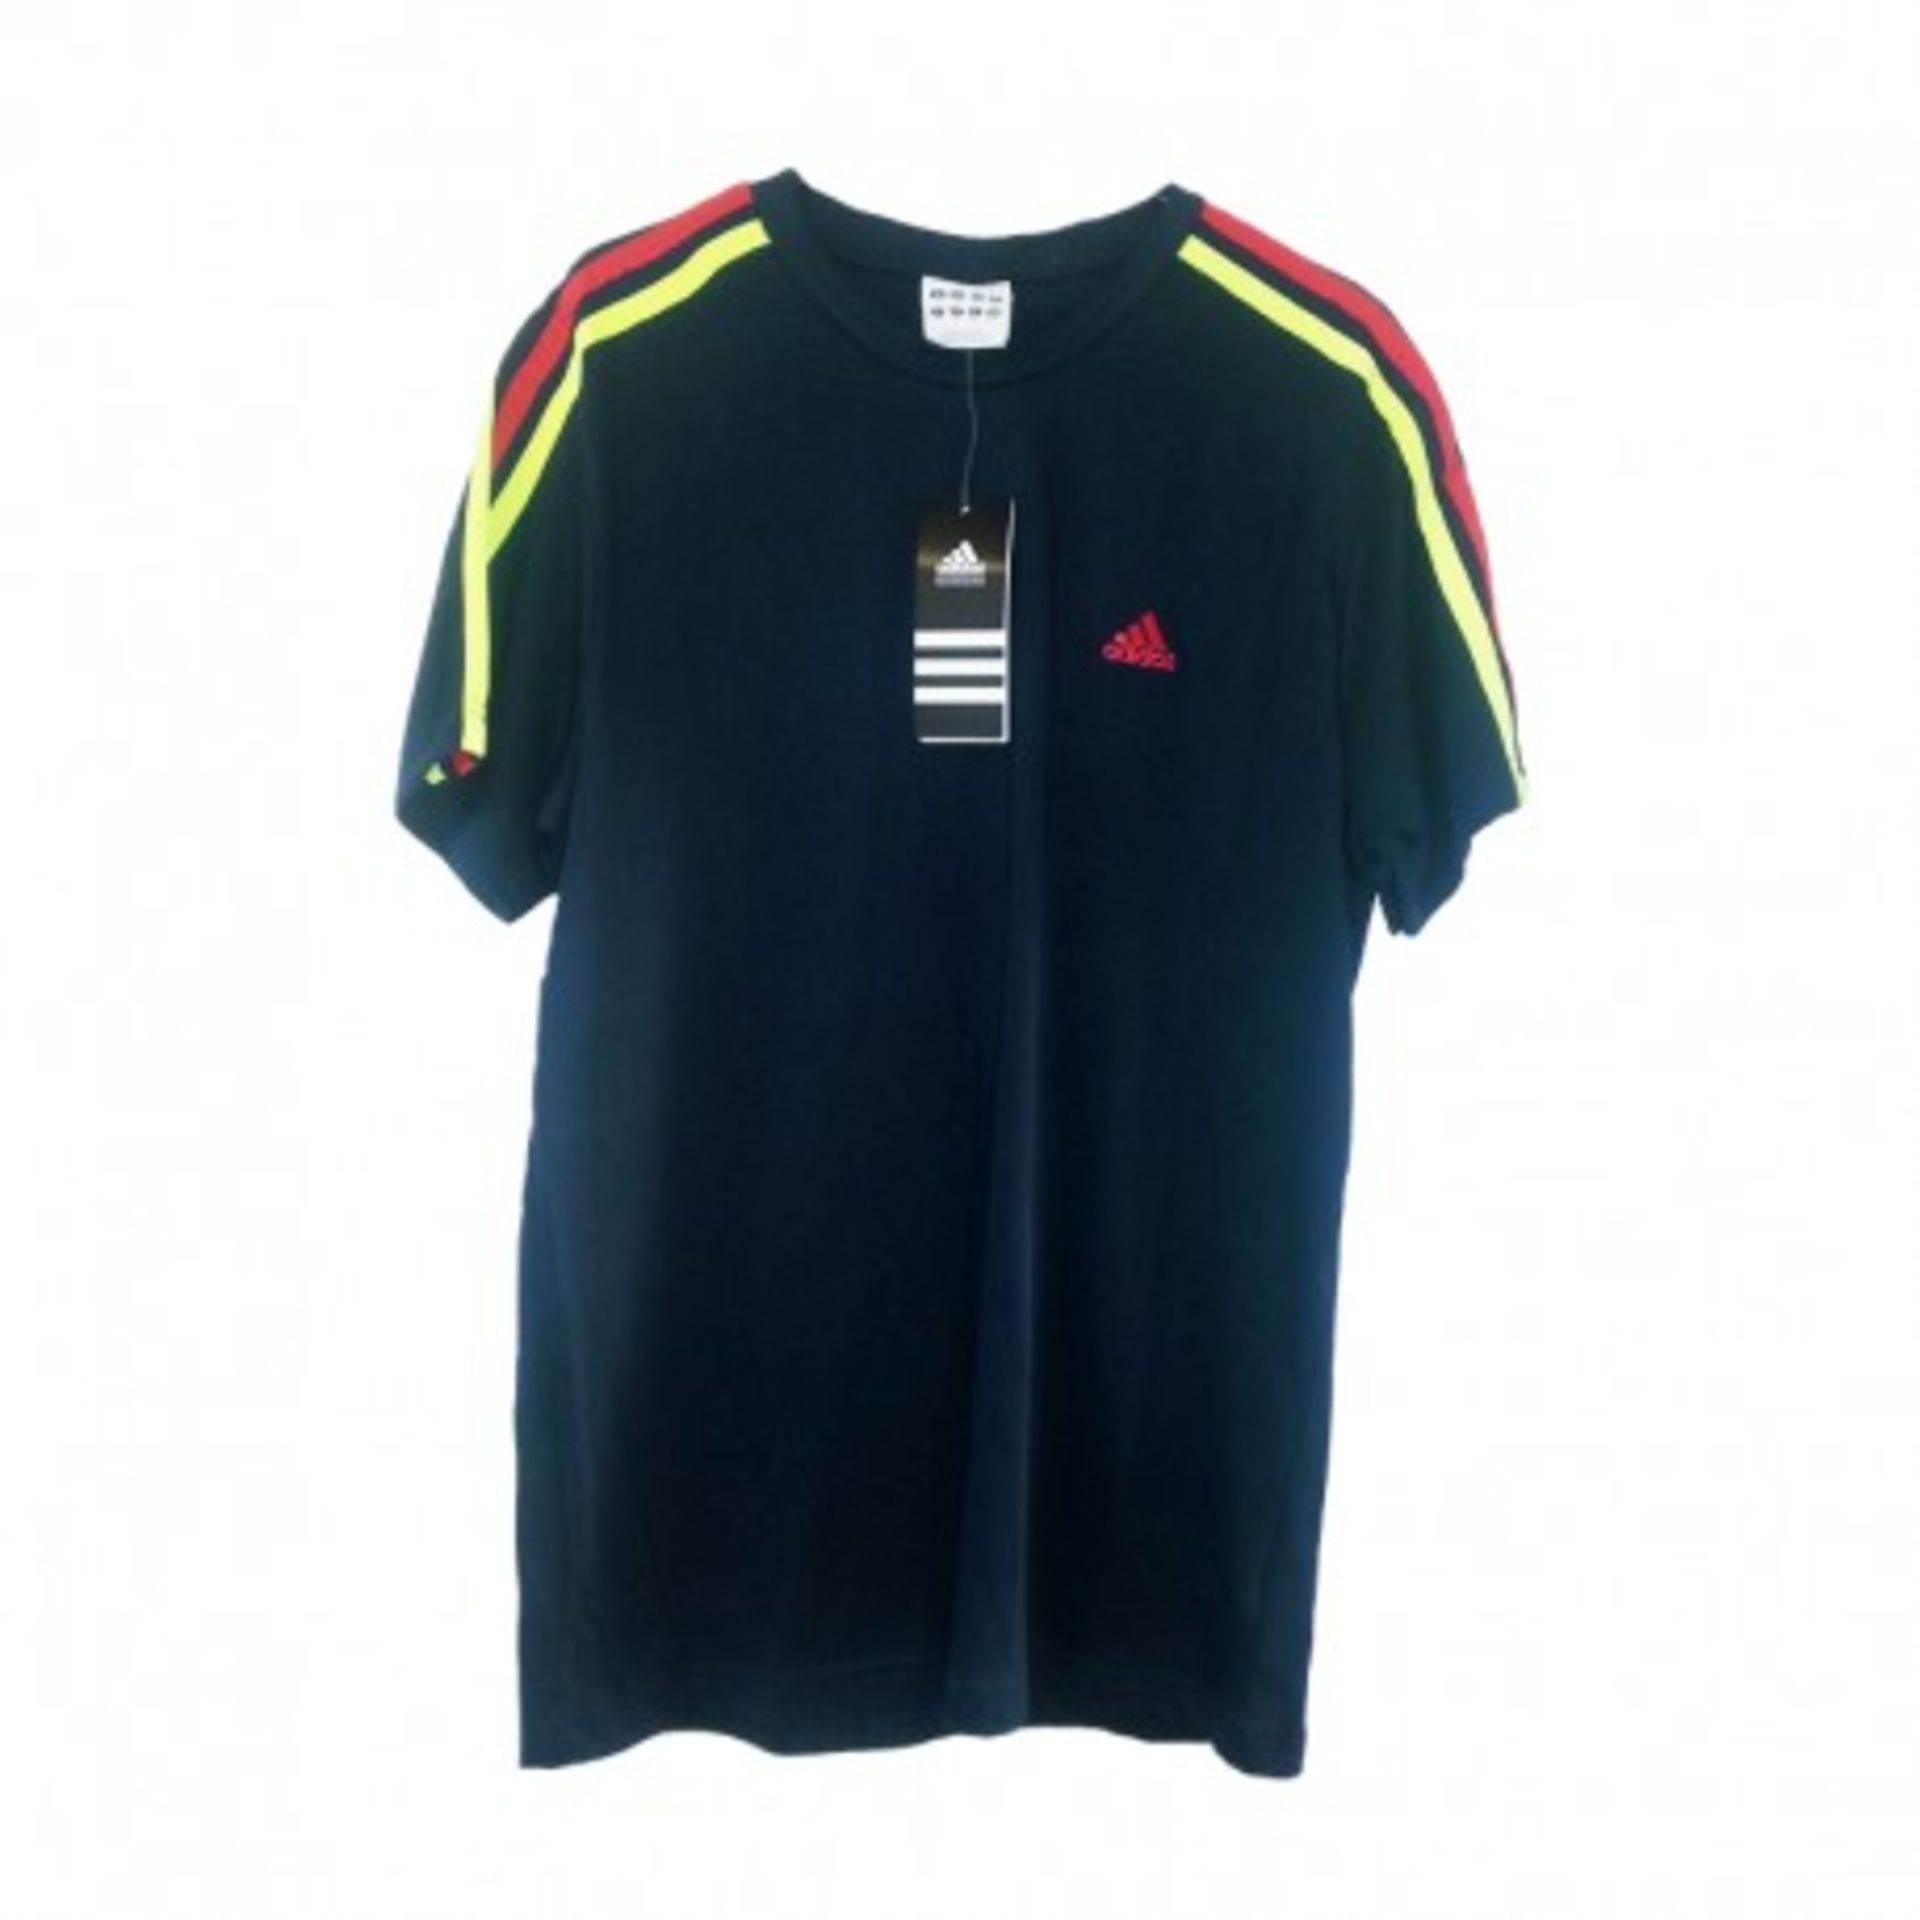 V Brand New 5 Pack Addidas Crew Neck T Shirts 100% Cotton Short Sleeve 3 Stripe Detail Colours: Navy